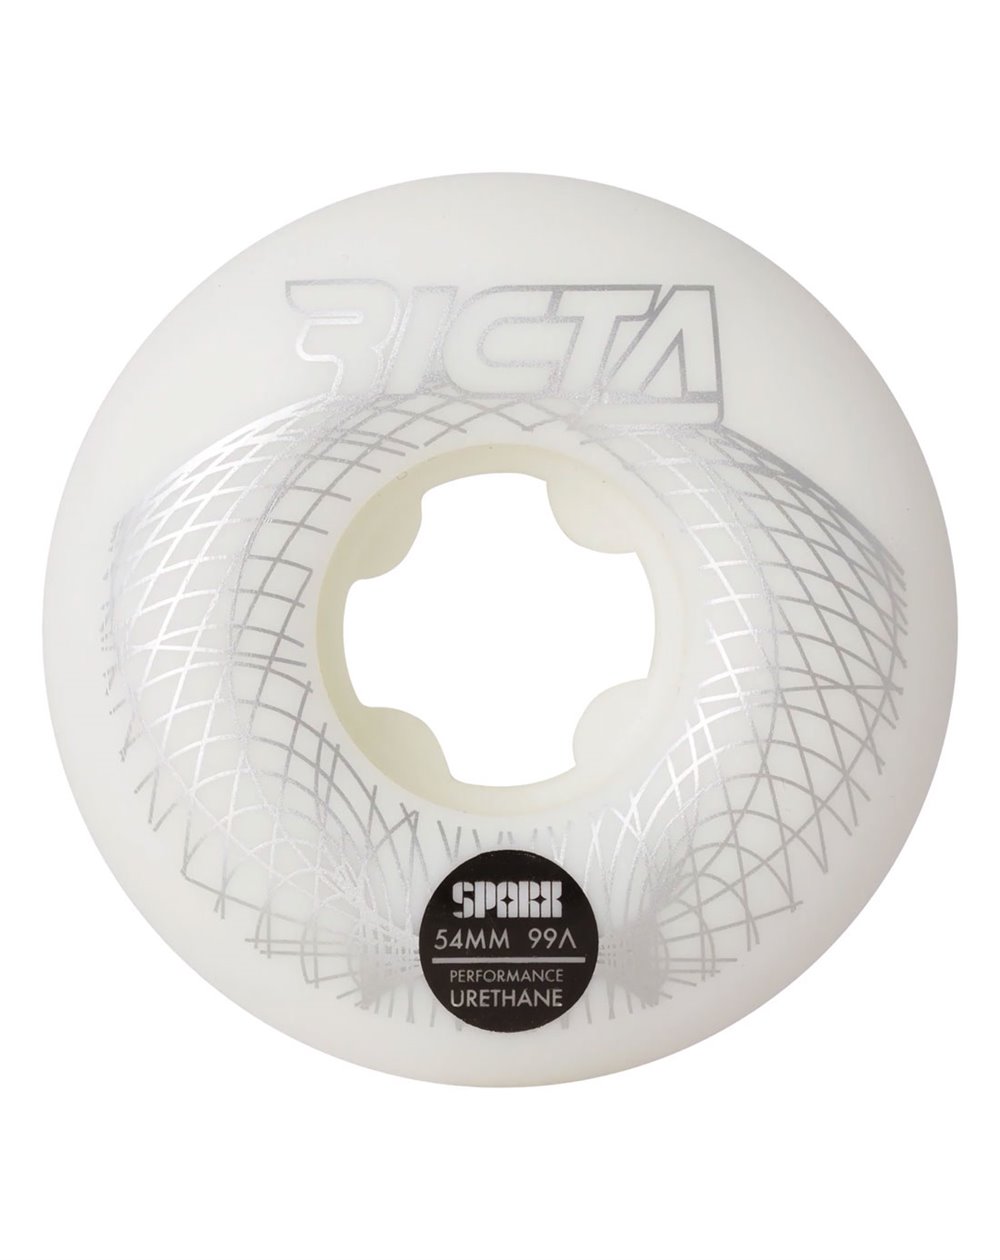 Ricta Roues Skateboard Sparx (Wireframe) 54mm 99A 4 pc